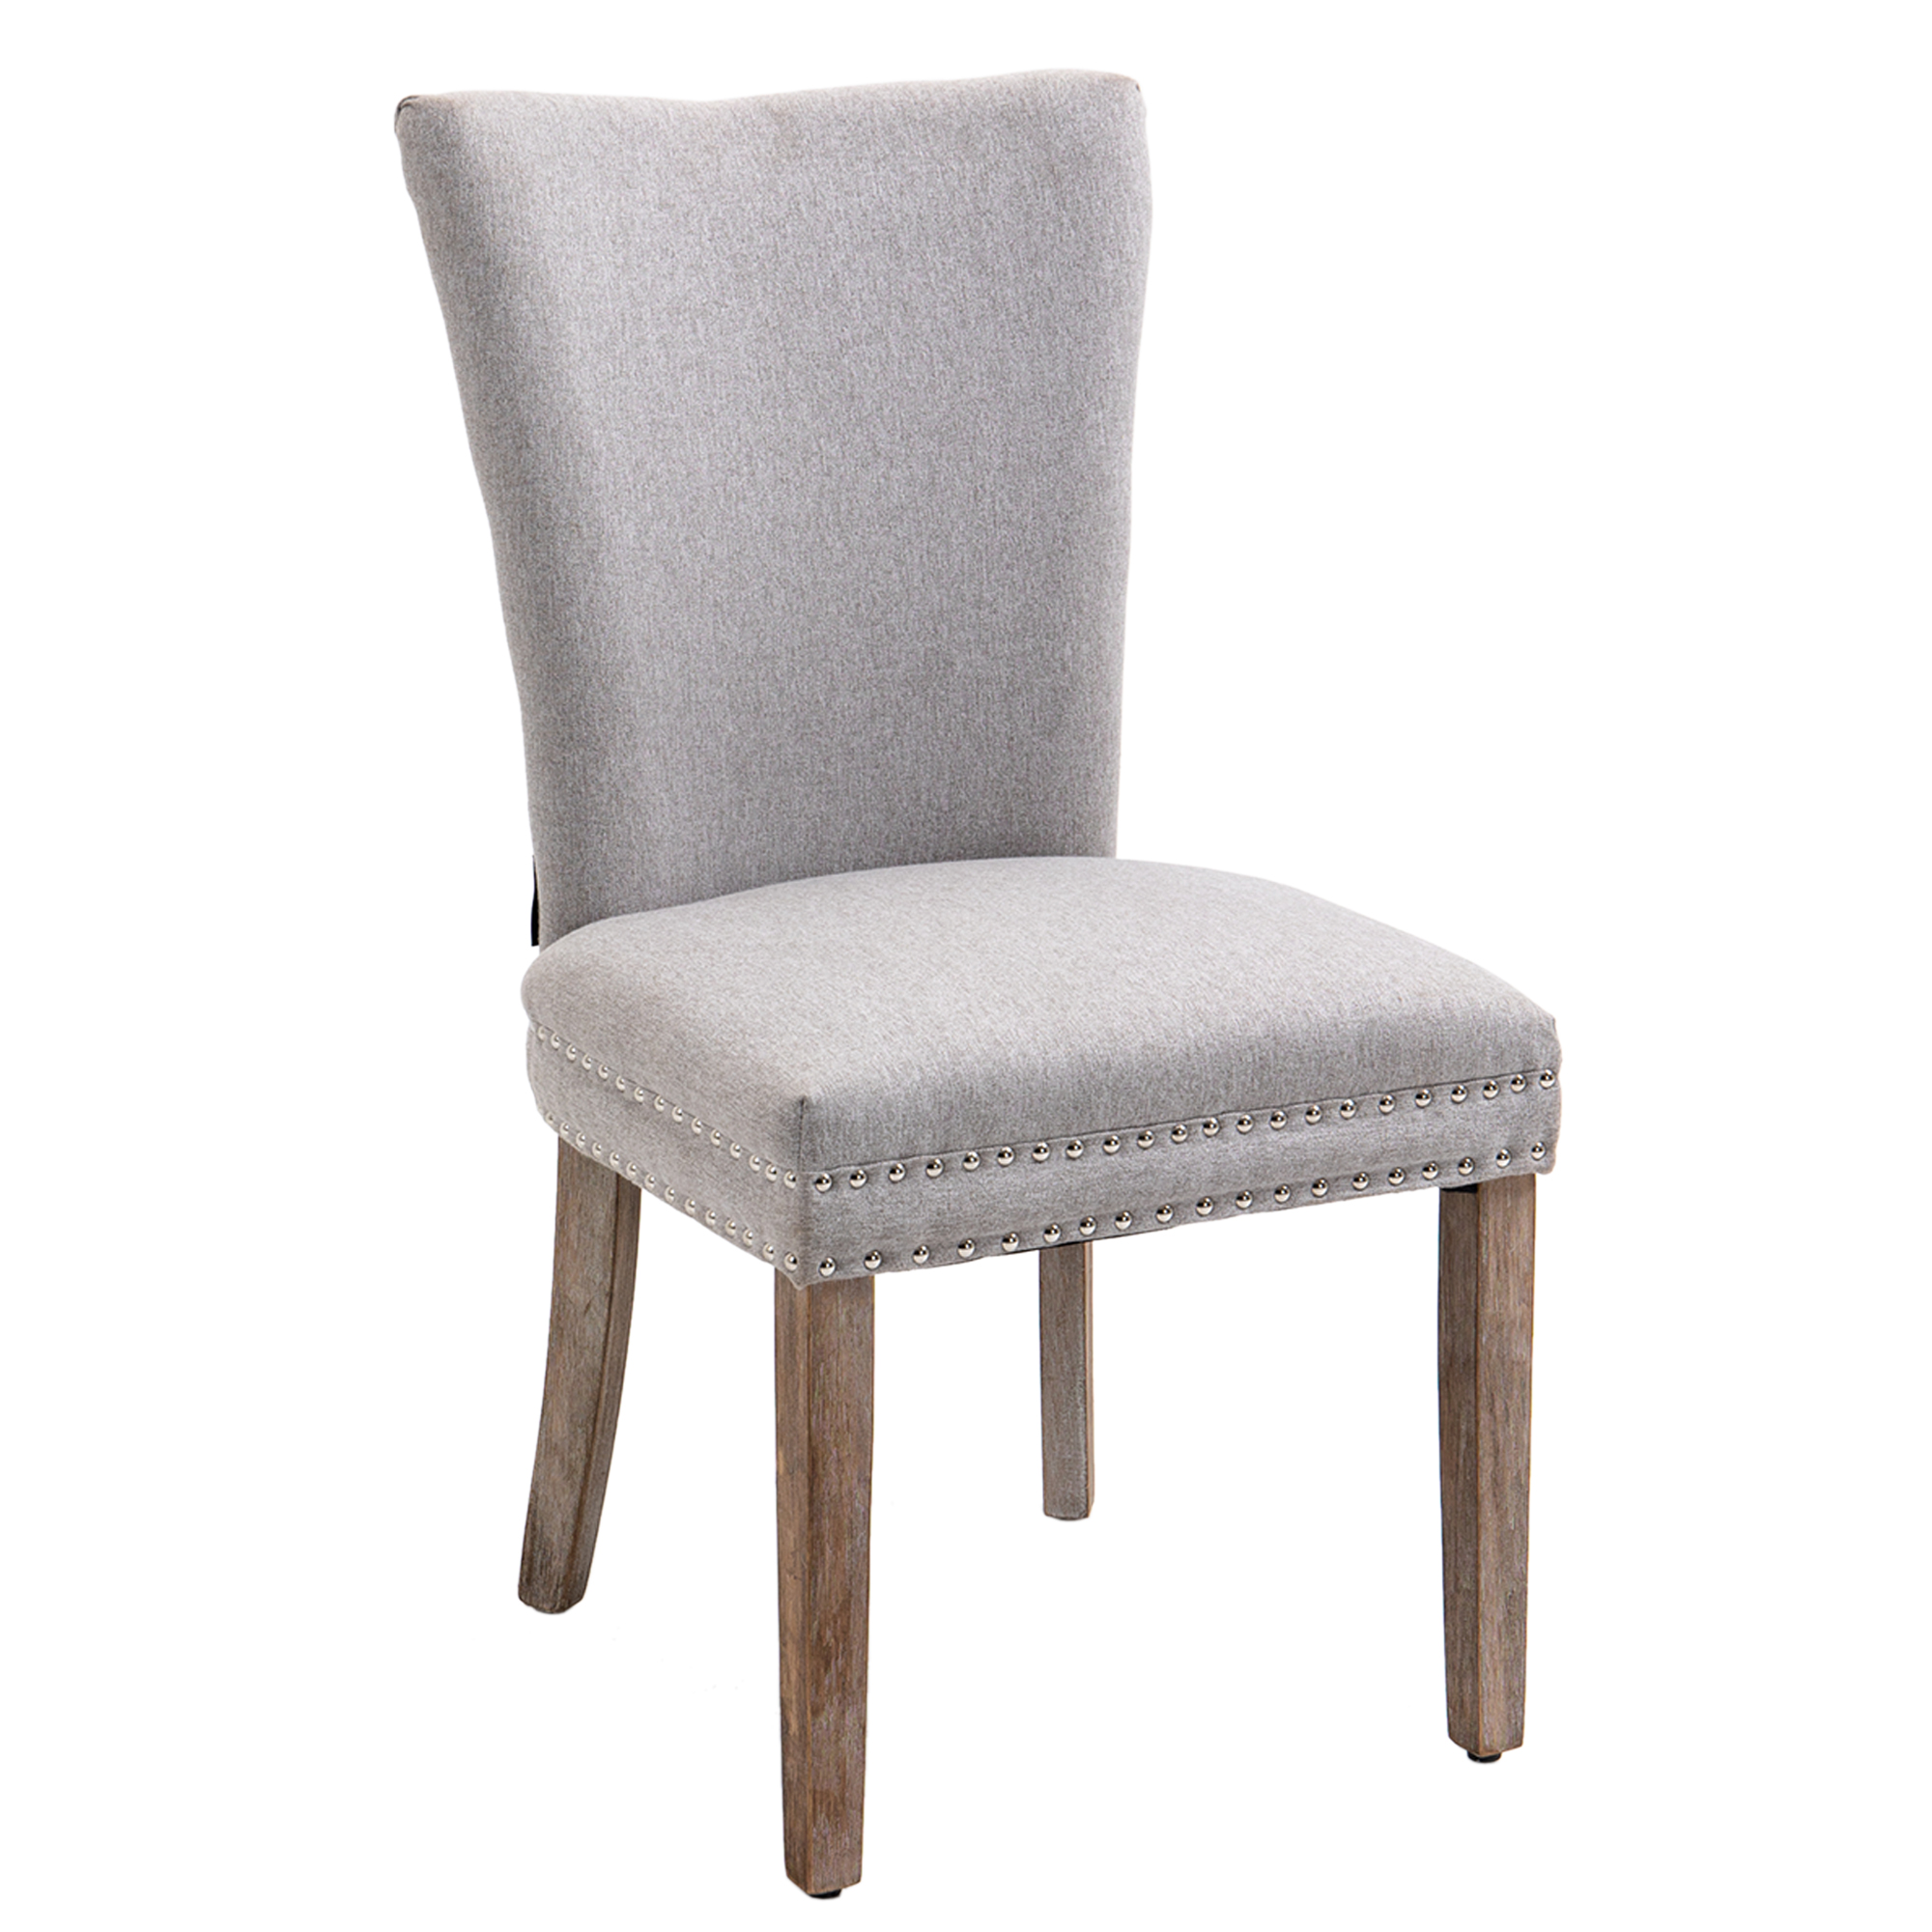 40 in. Classic Linen Fabric Nail-head Tufted Parsons Chairs, Dining Chair with 4 Solid Wood Legs, Set of 2-CASAINC